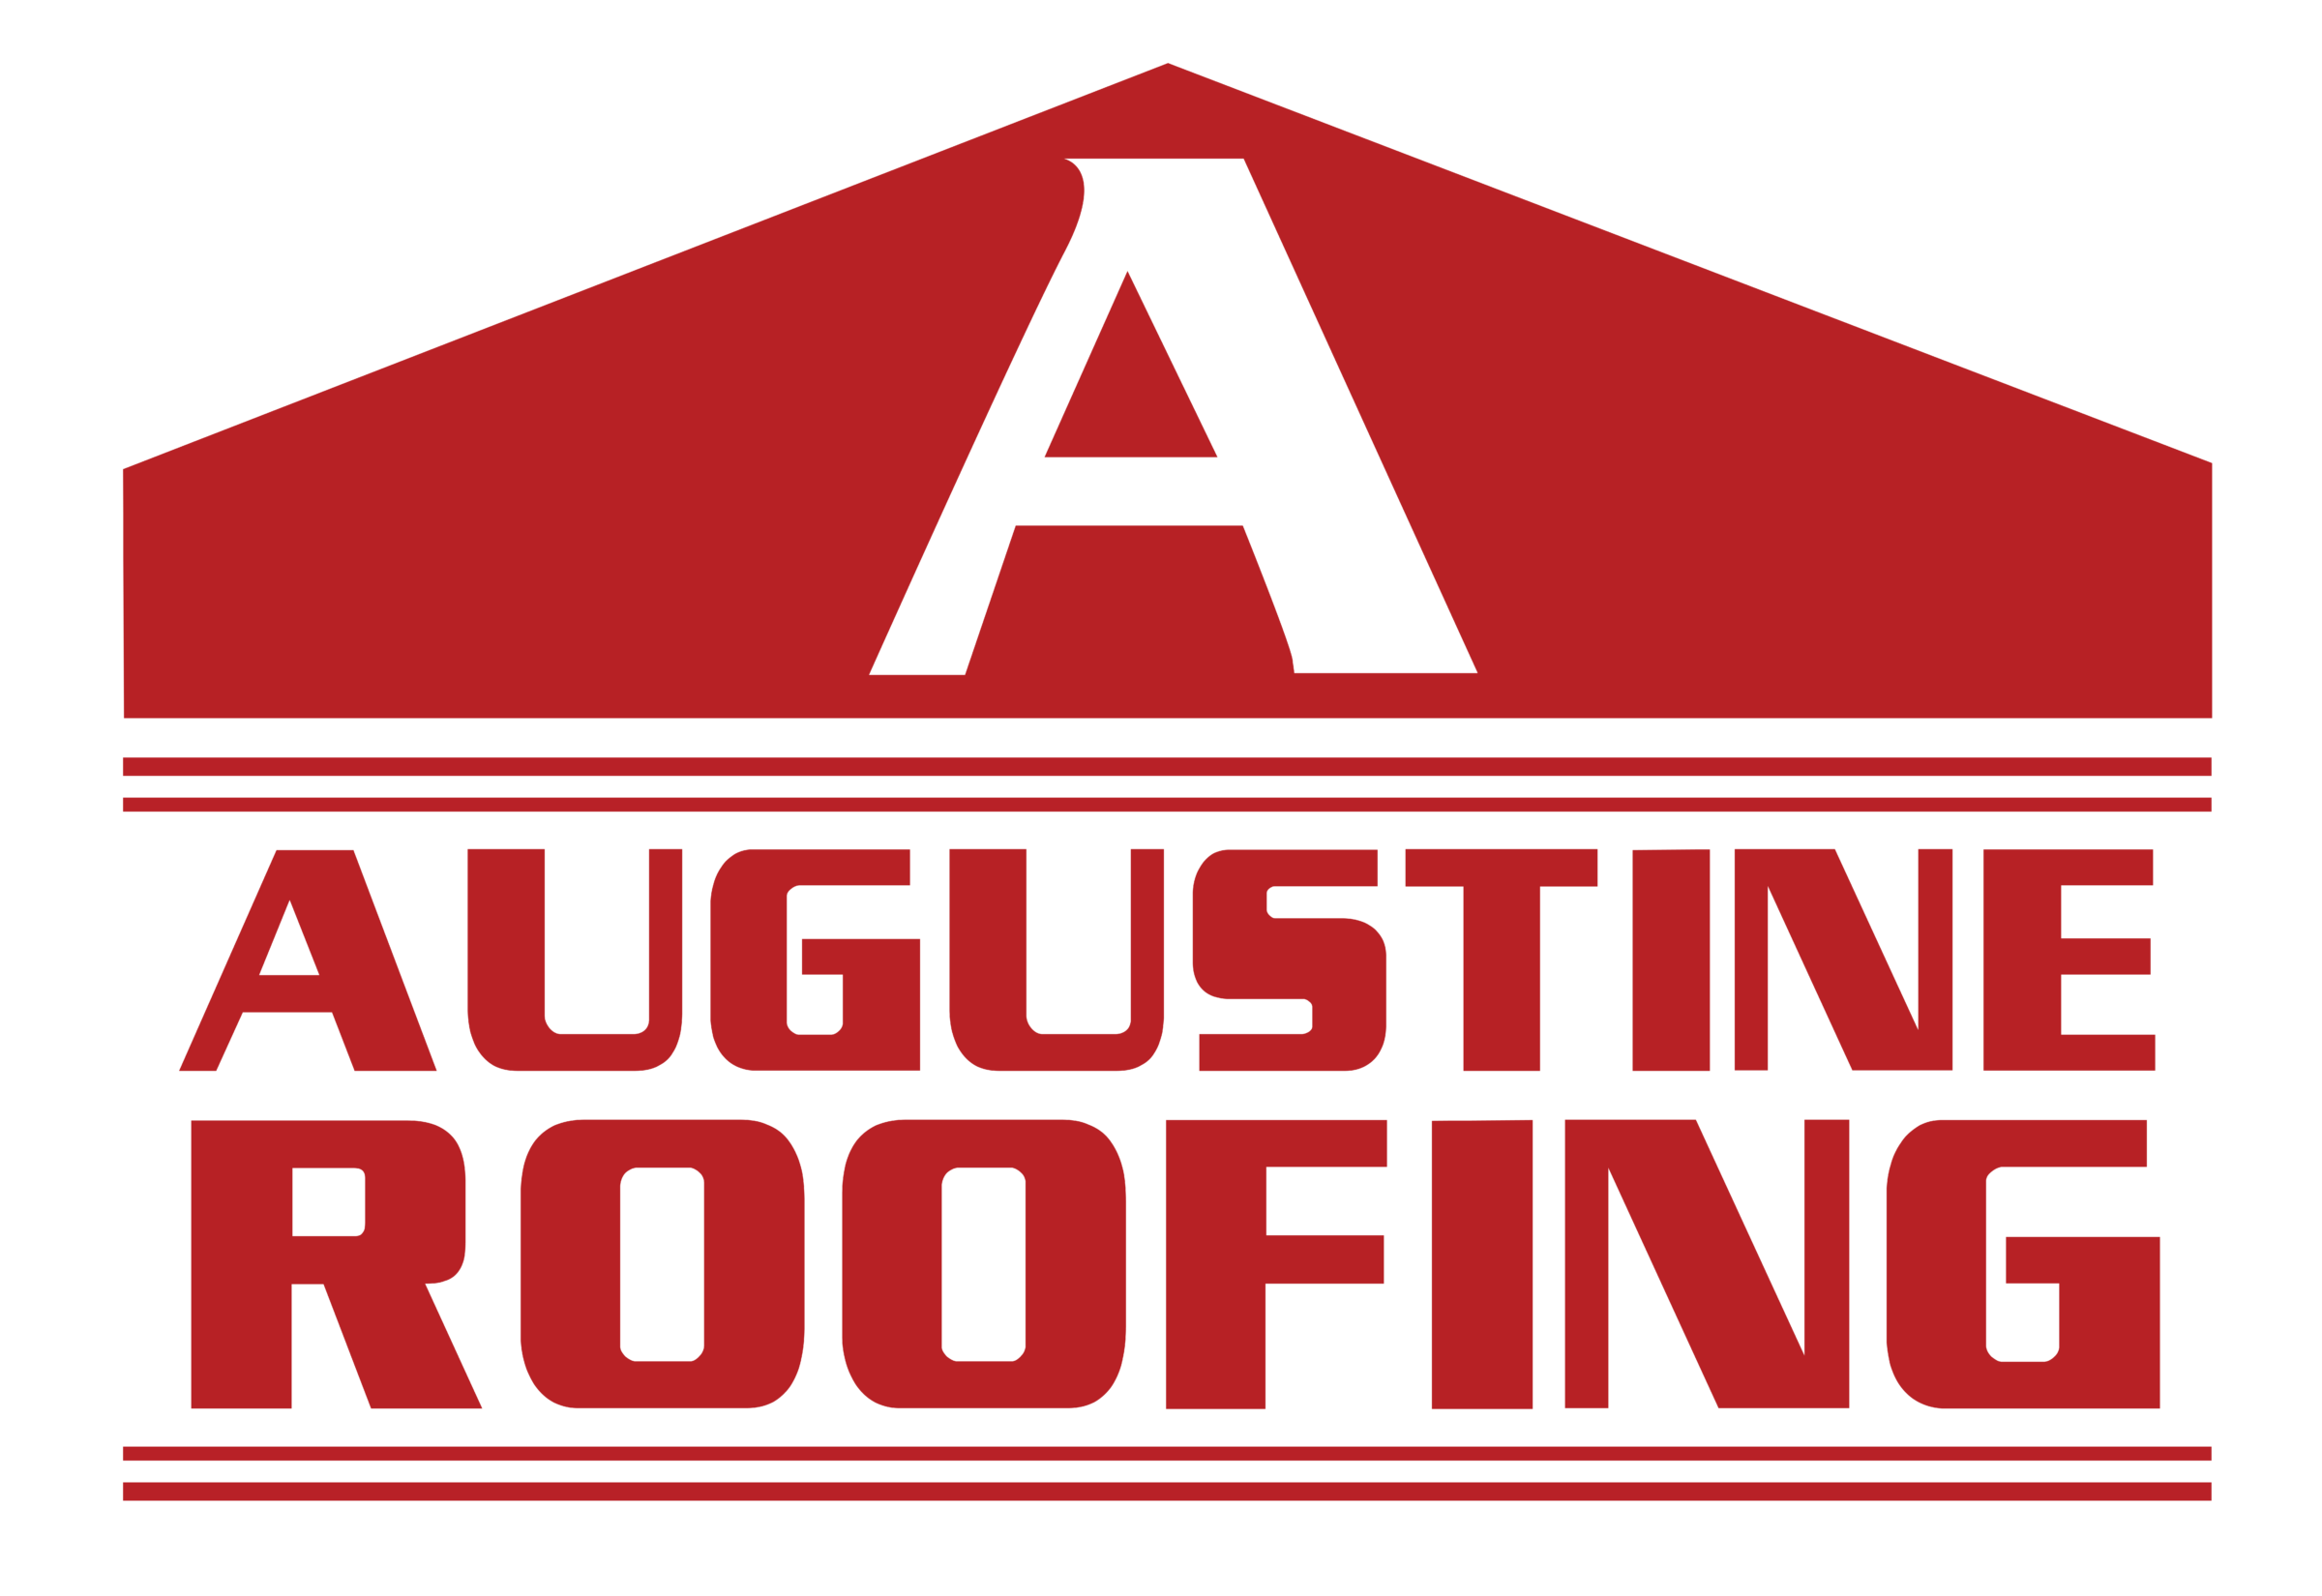 Augustine Roofing